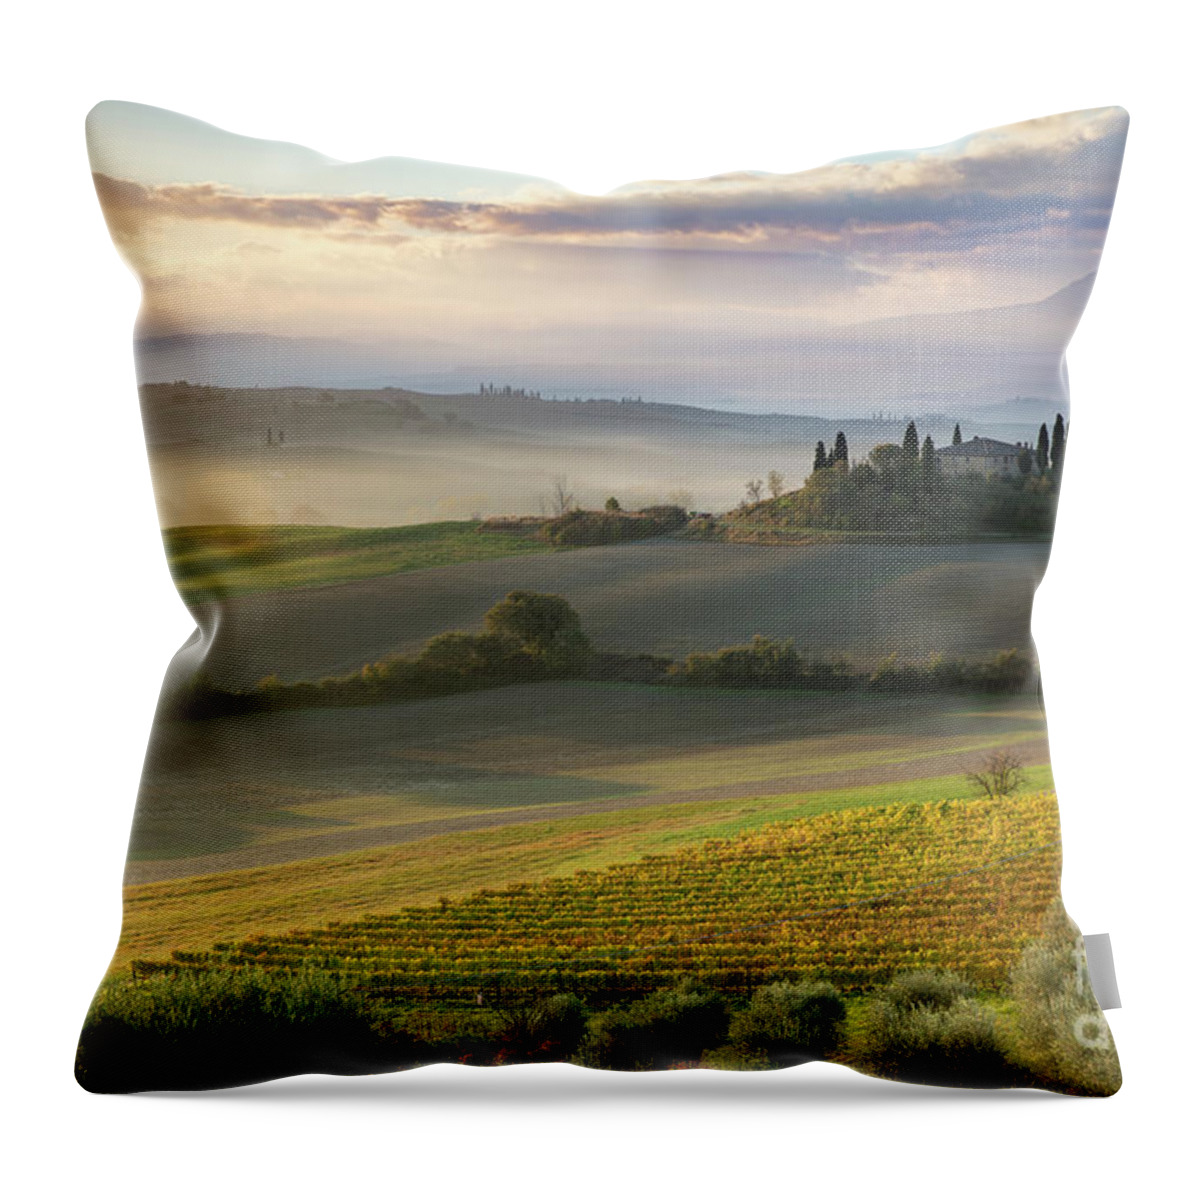 Tuscany Throw Pillow featuring the photograph Belvedere Morning by Brian Jannsen